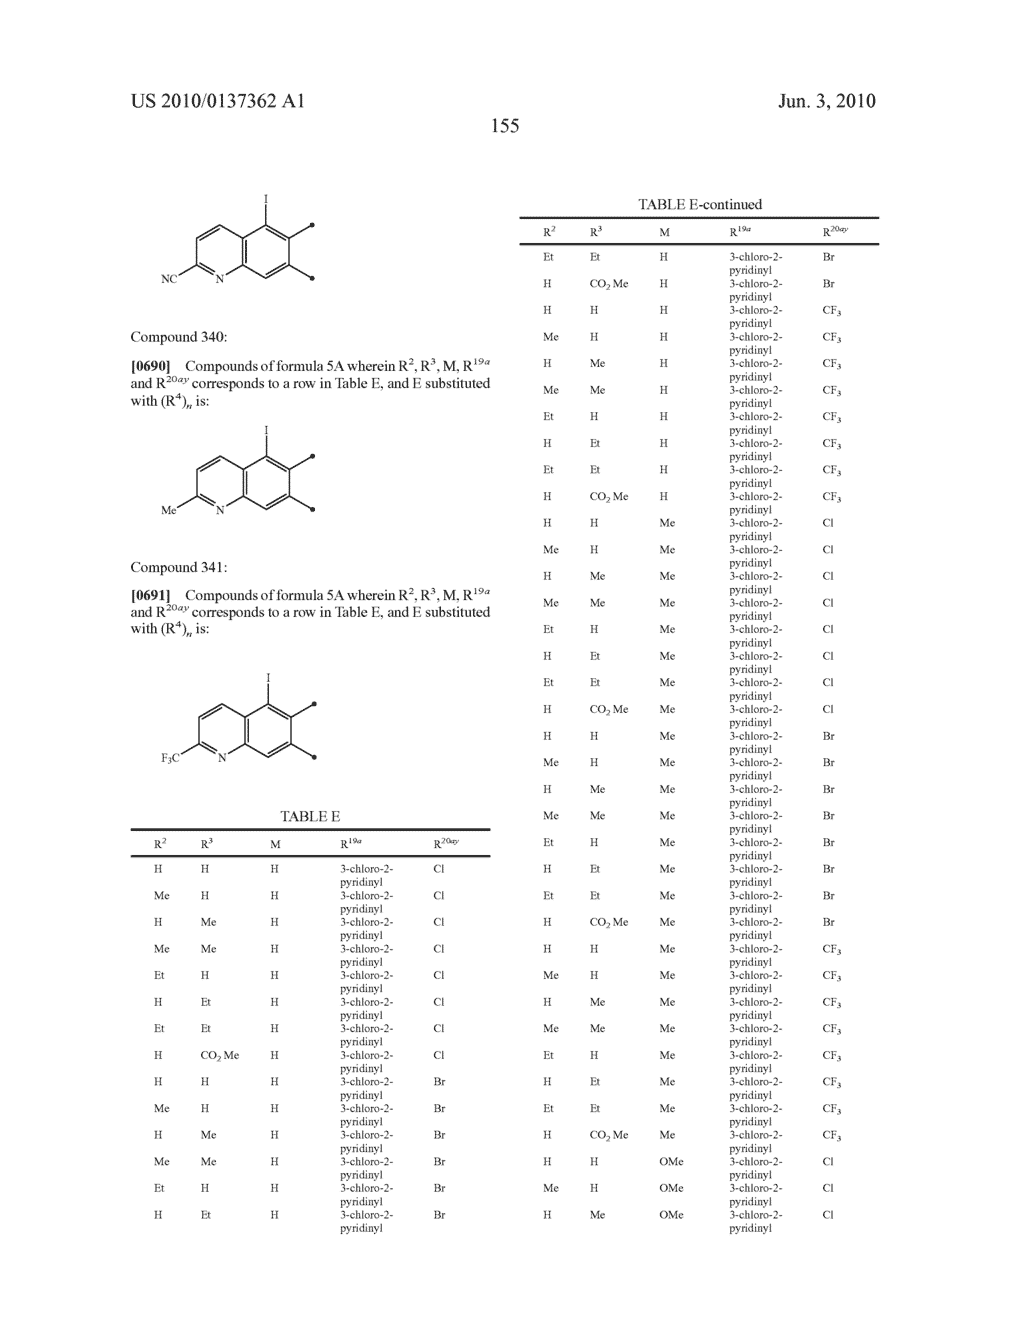 HETEROCYCLIC HYDRAZIDE COMPOUND AND PESTICIDAL USE OF THE SAME - diagram, schematic, and image 156